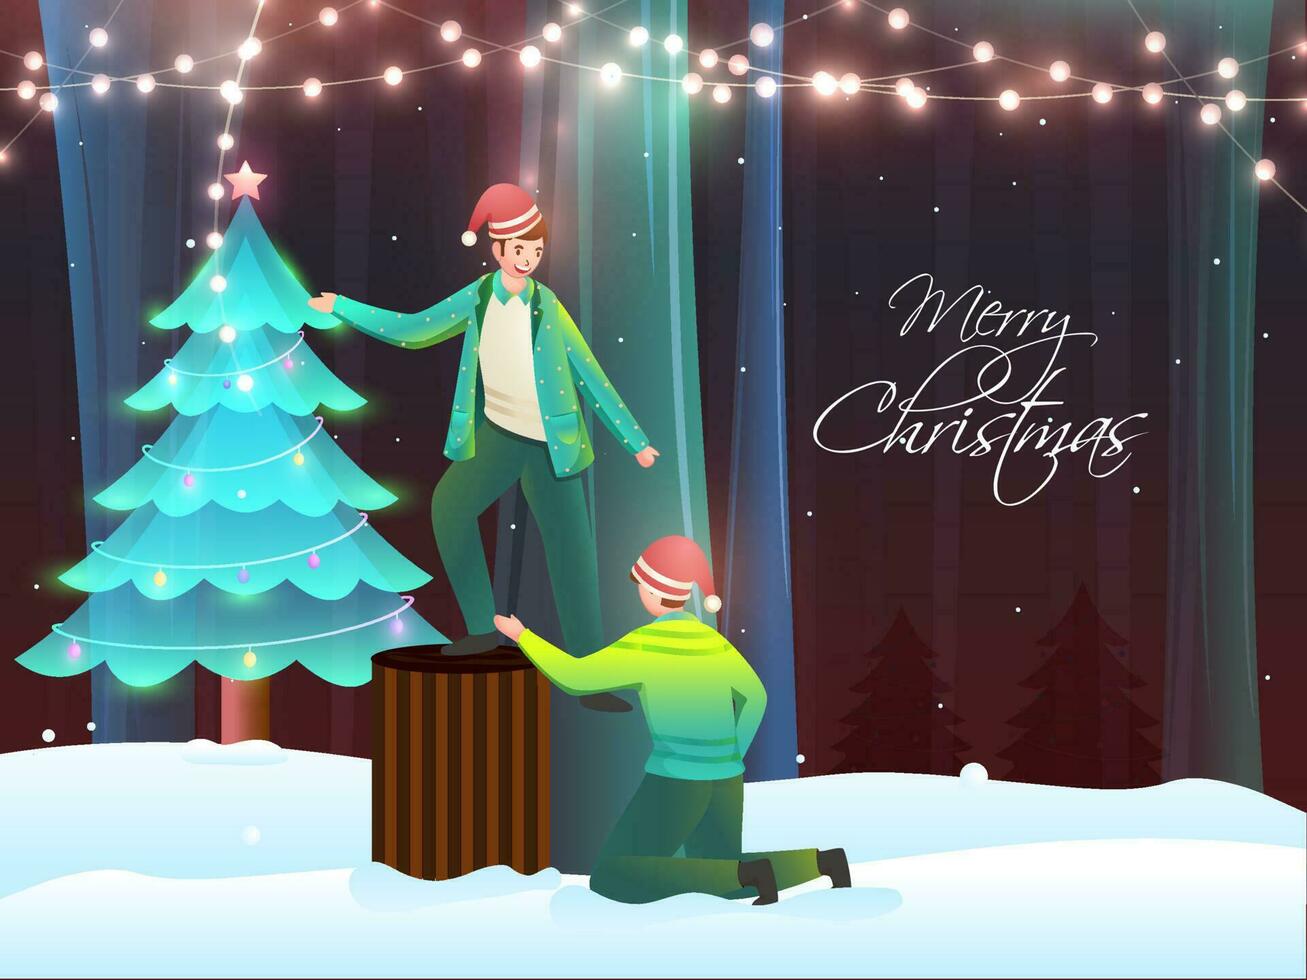 Merry Christmas Concept With Young Boys Character, Xmas Tree And Lighting Garland On Snow Forest Background. vector